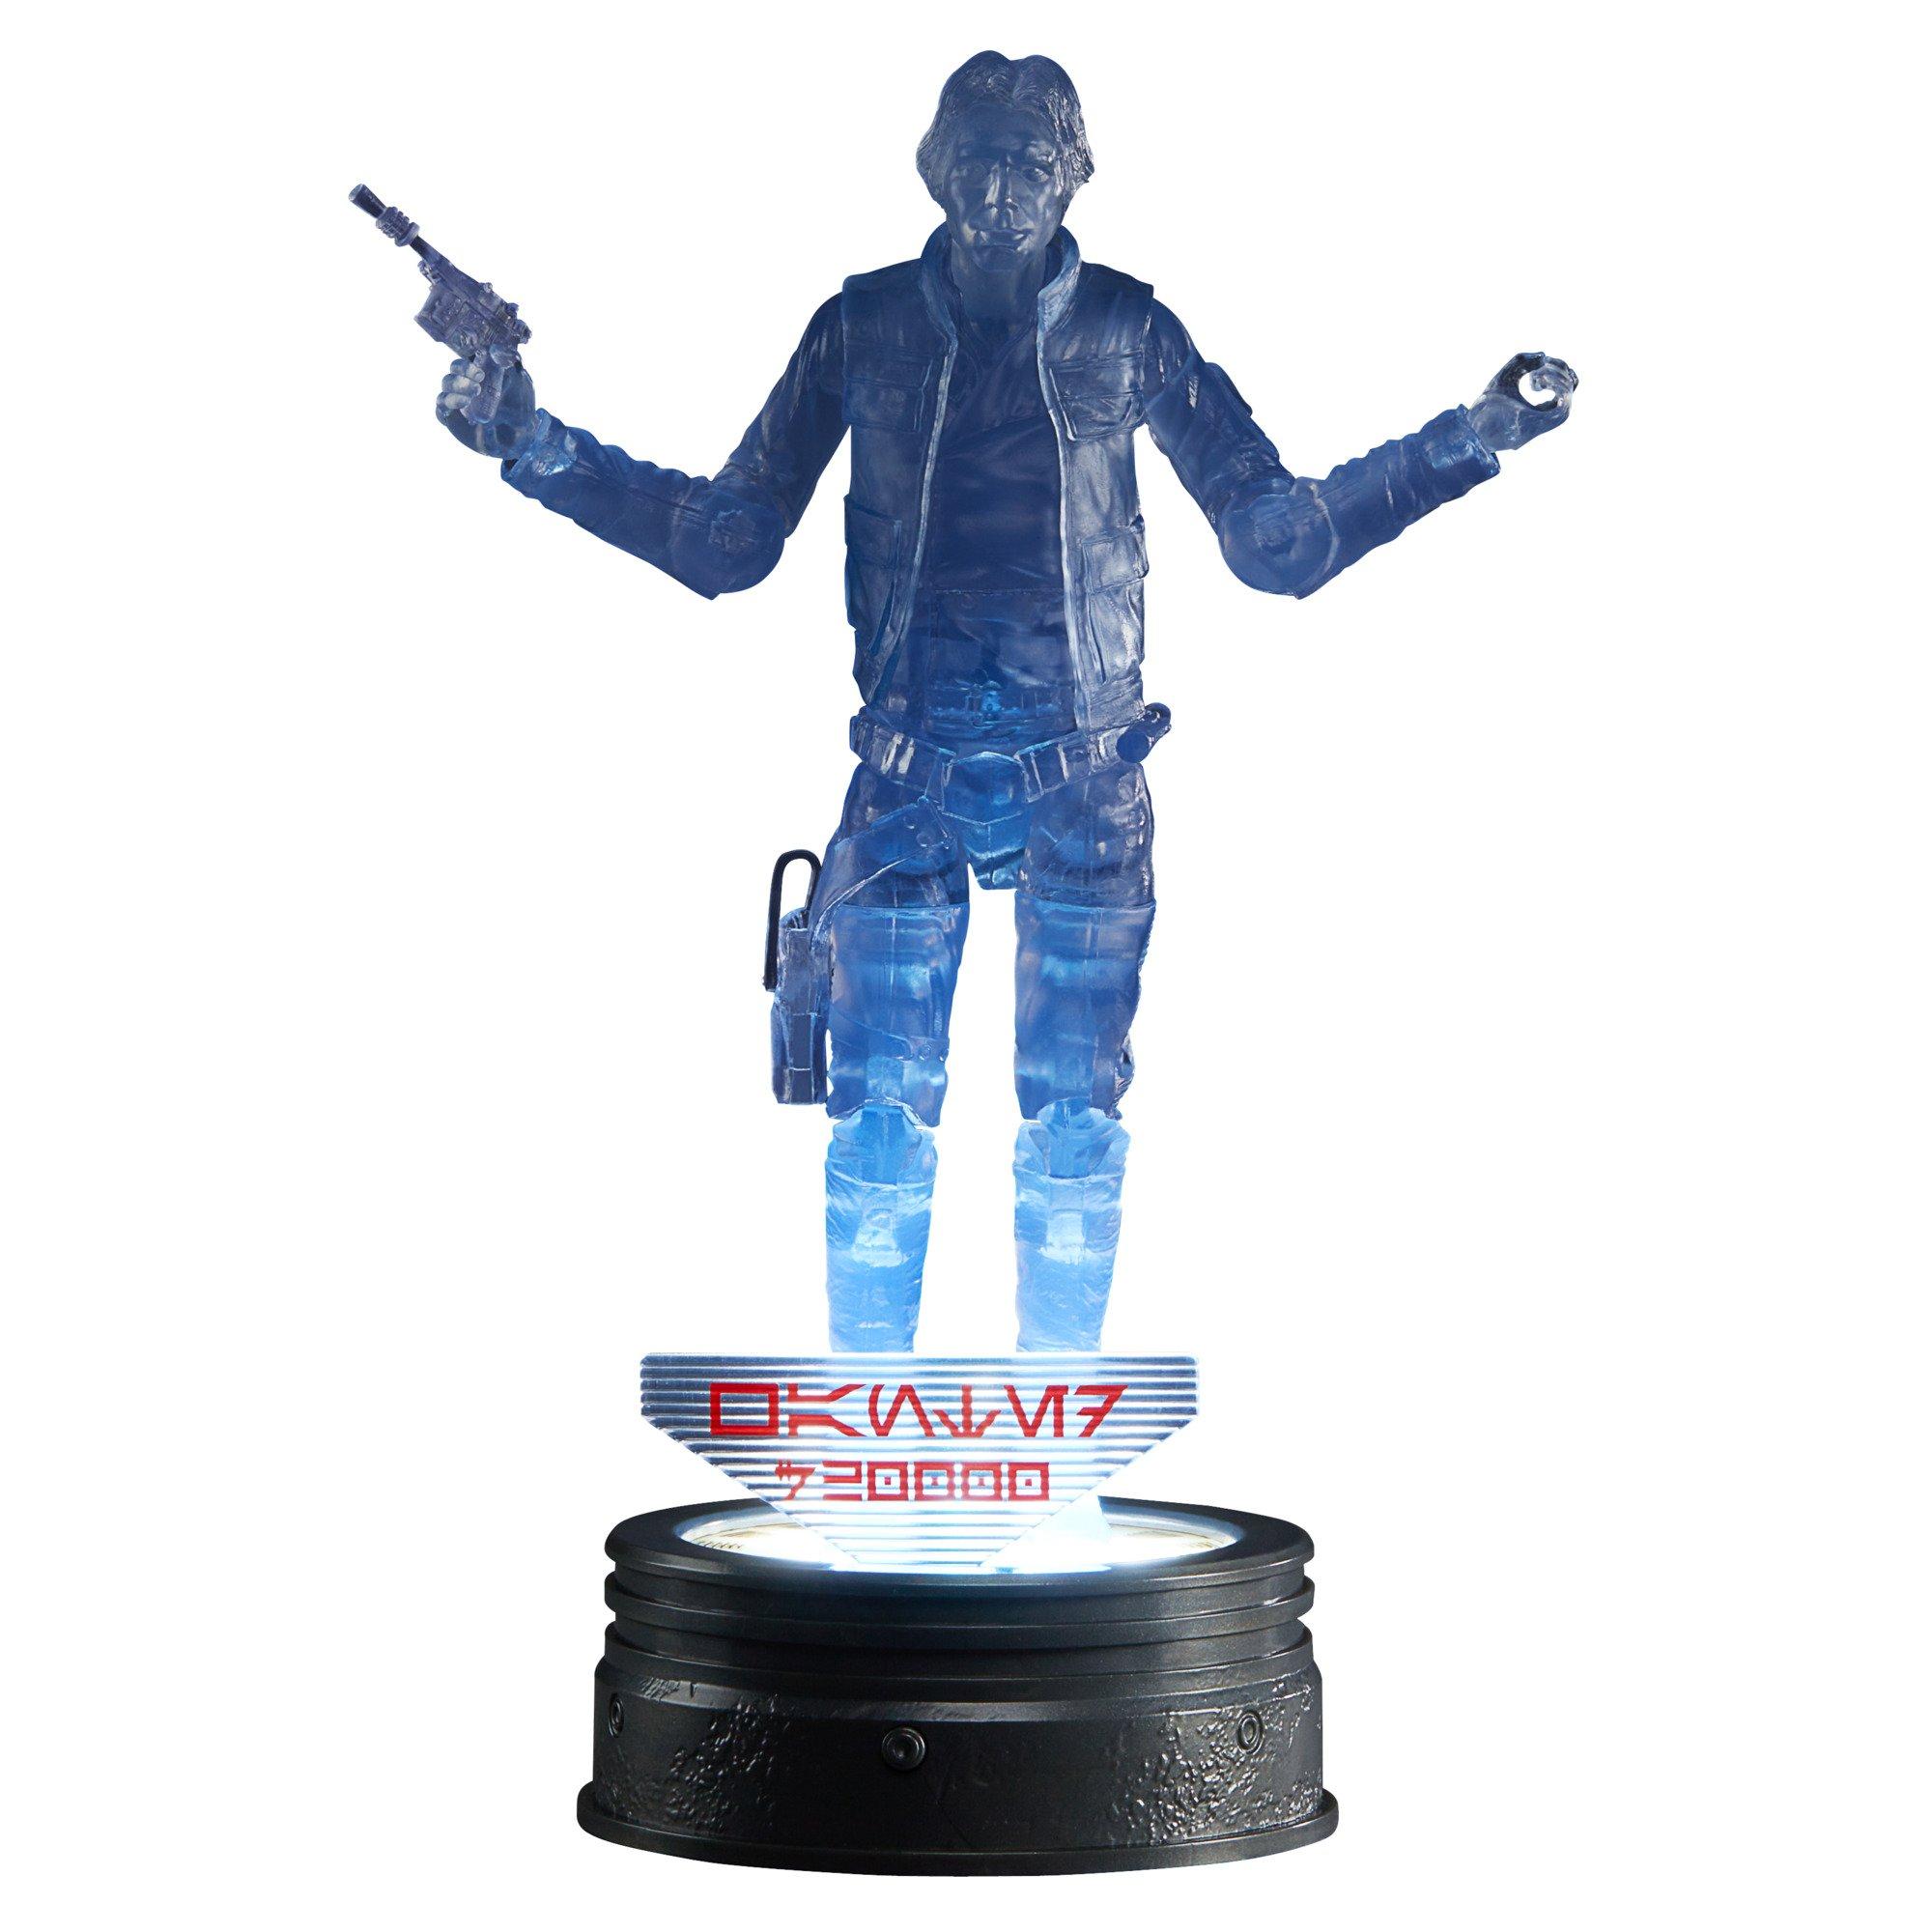 Hasbro Star Wars: The Black Series Star Wars: Holocomm Collection Han Solo 6-in Action Figure